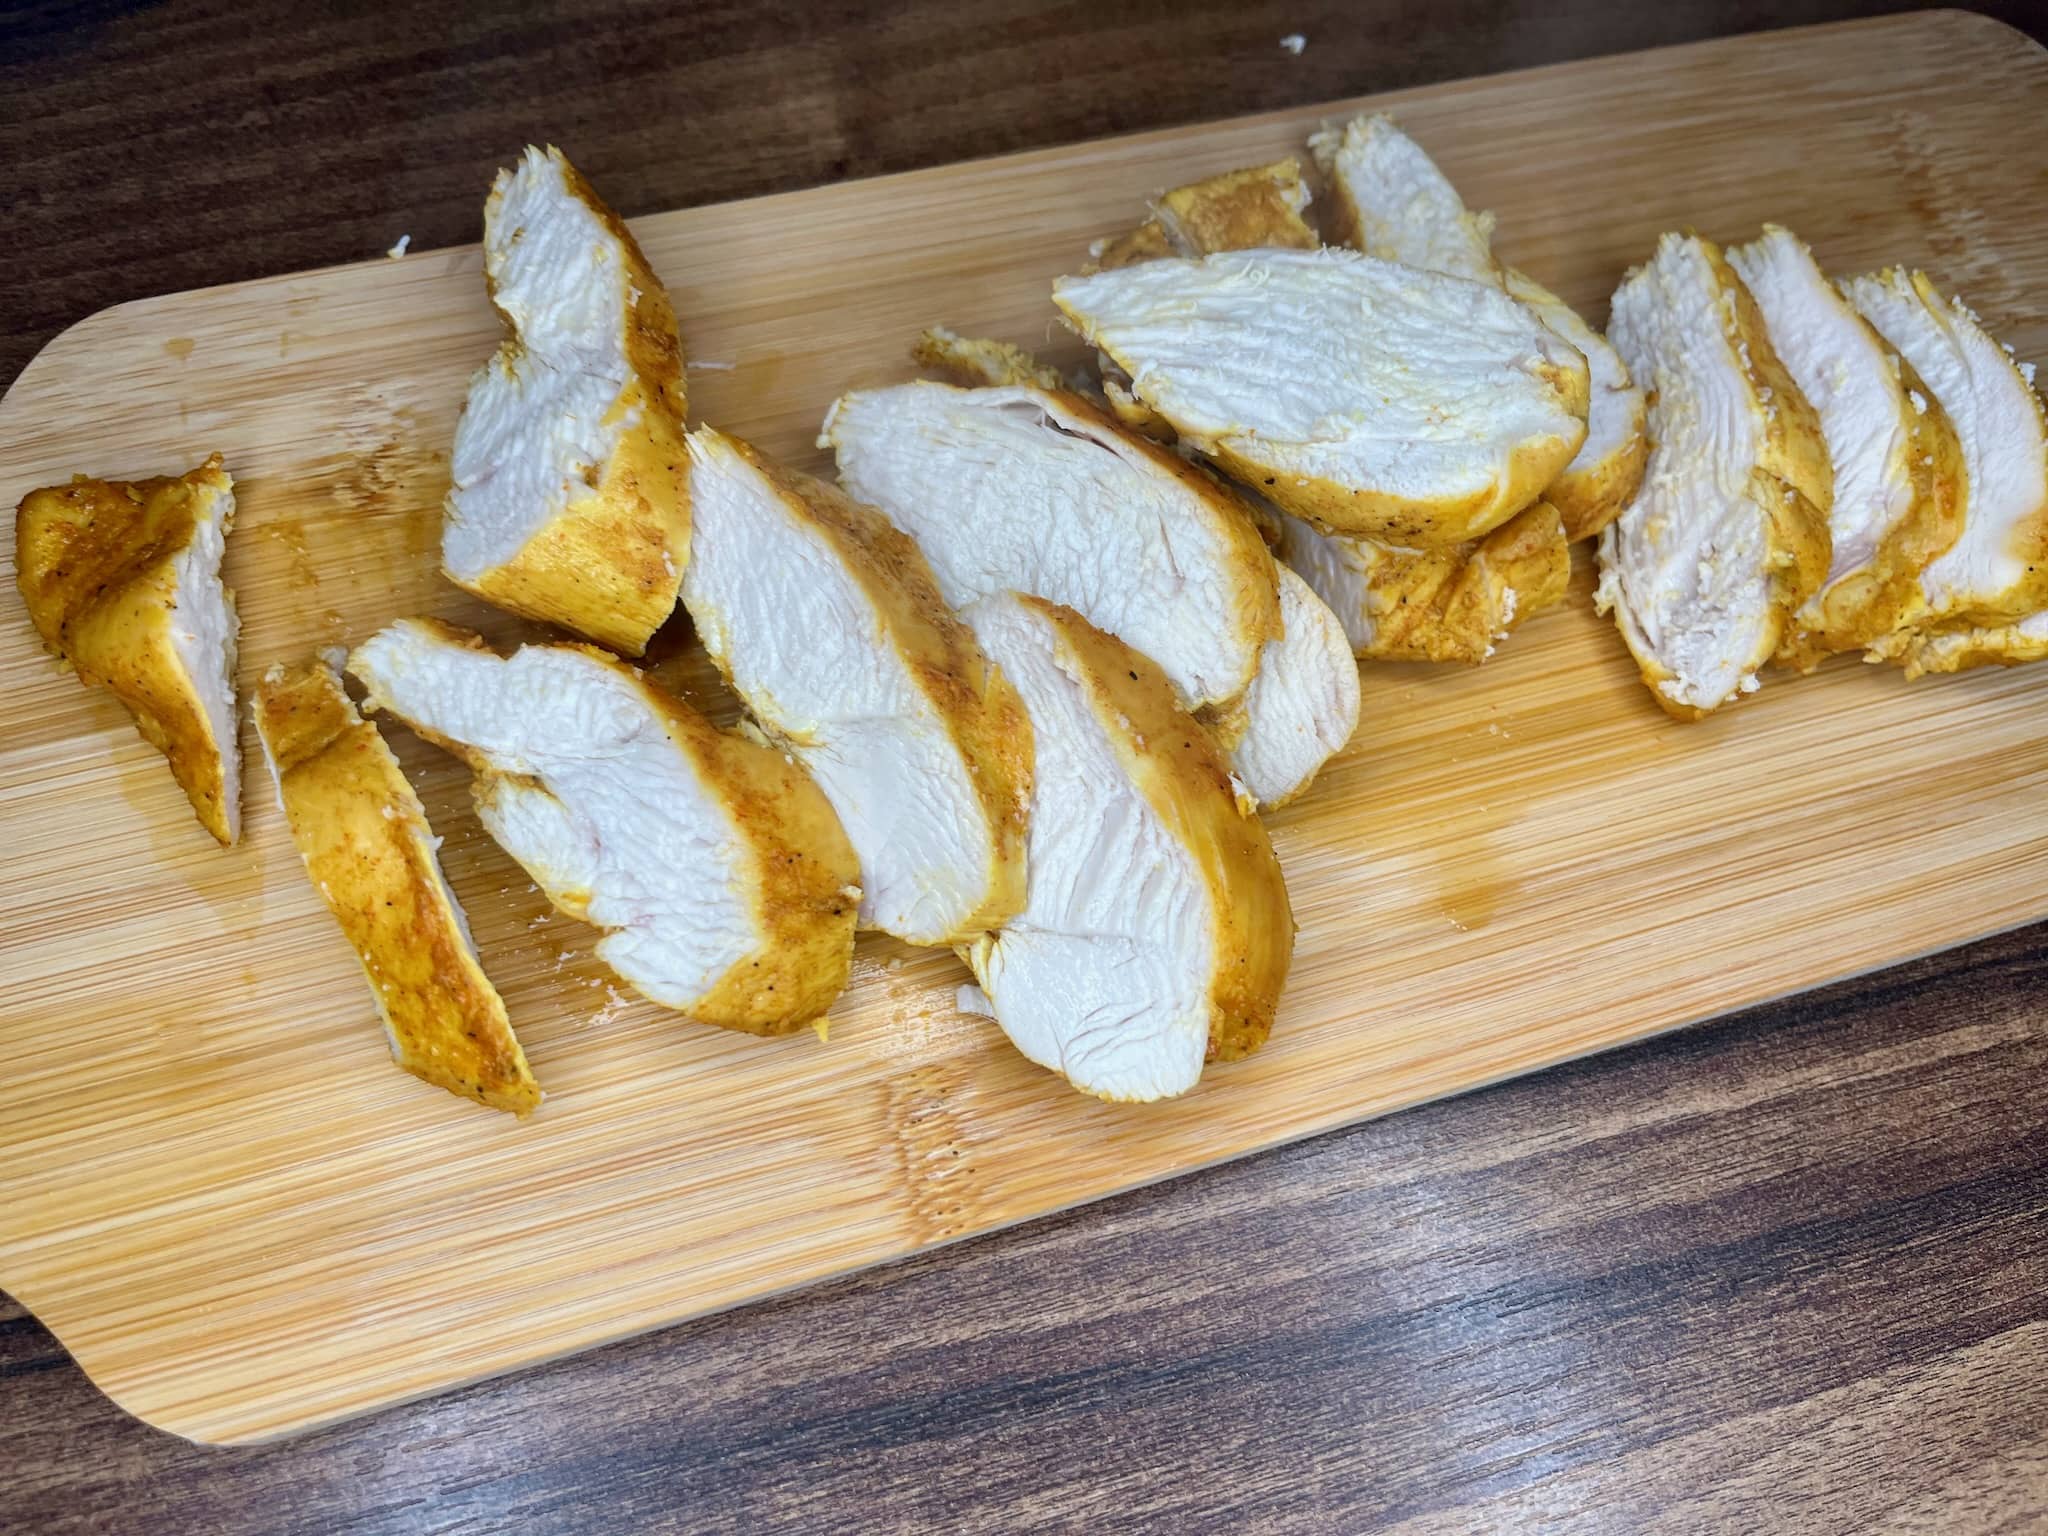 Tender, cooked chicken breasts are sliced on a cutting board